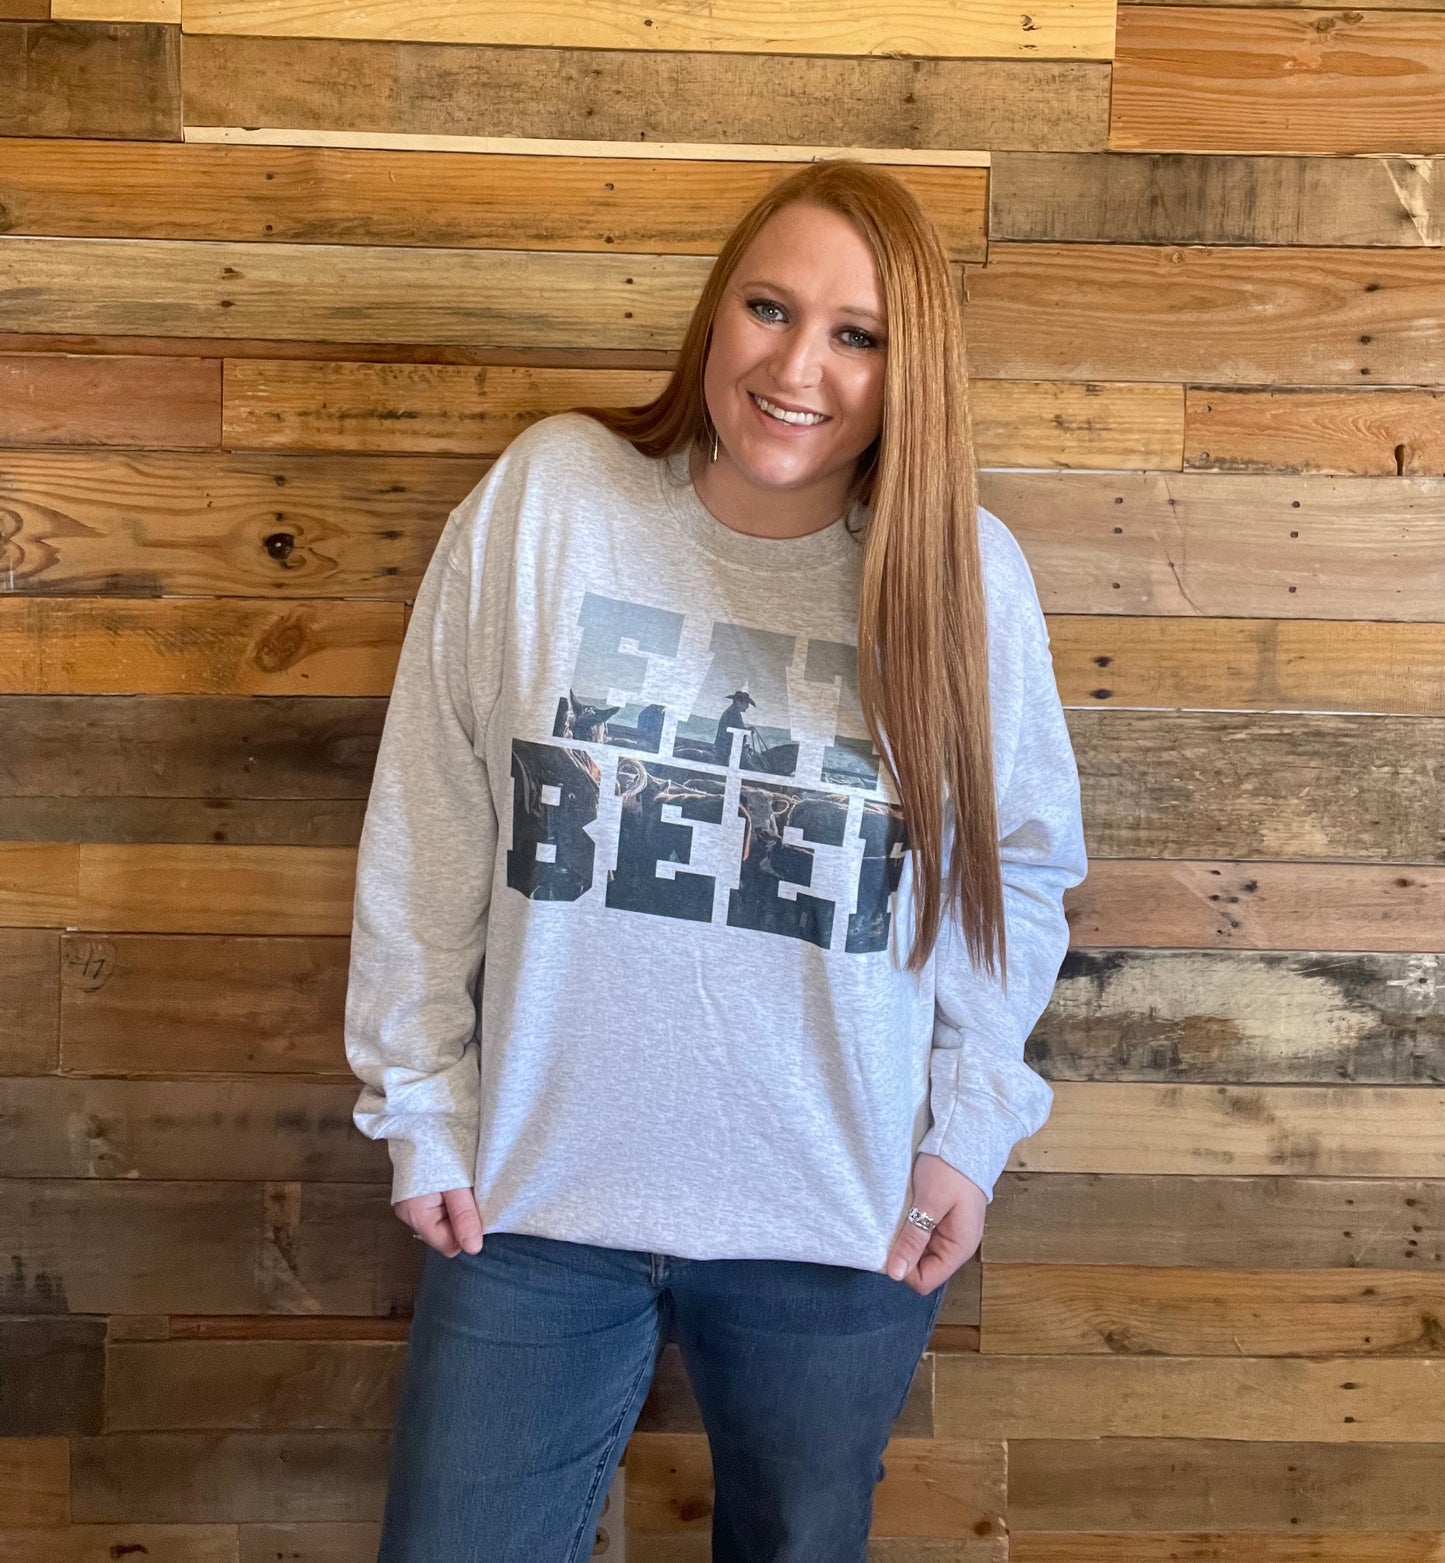 Model wearing Light grey sweat shirt that says Eat Beef with a cowboy and cow in the letters in Large